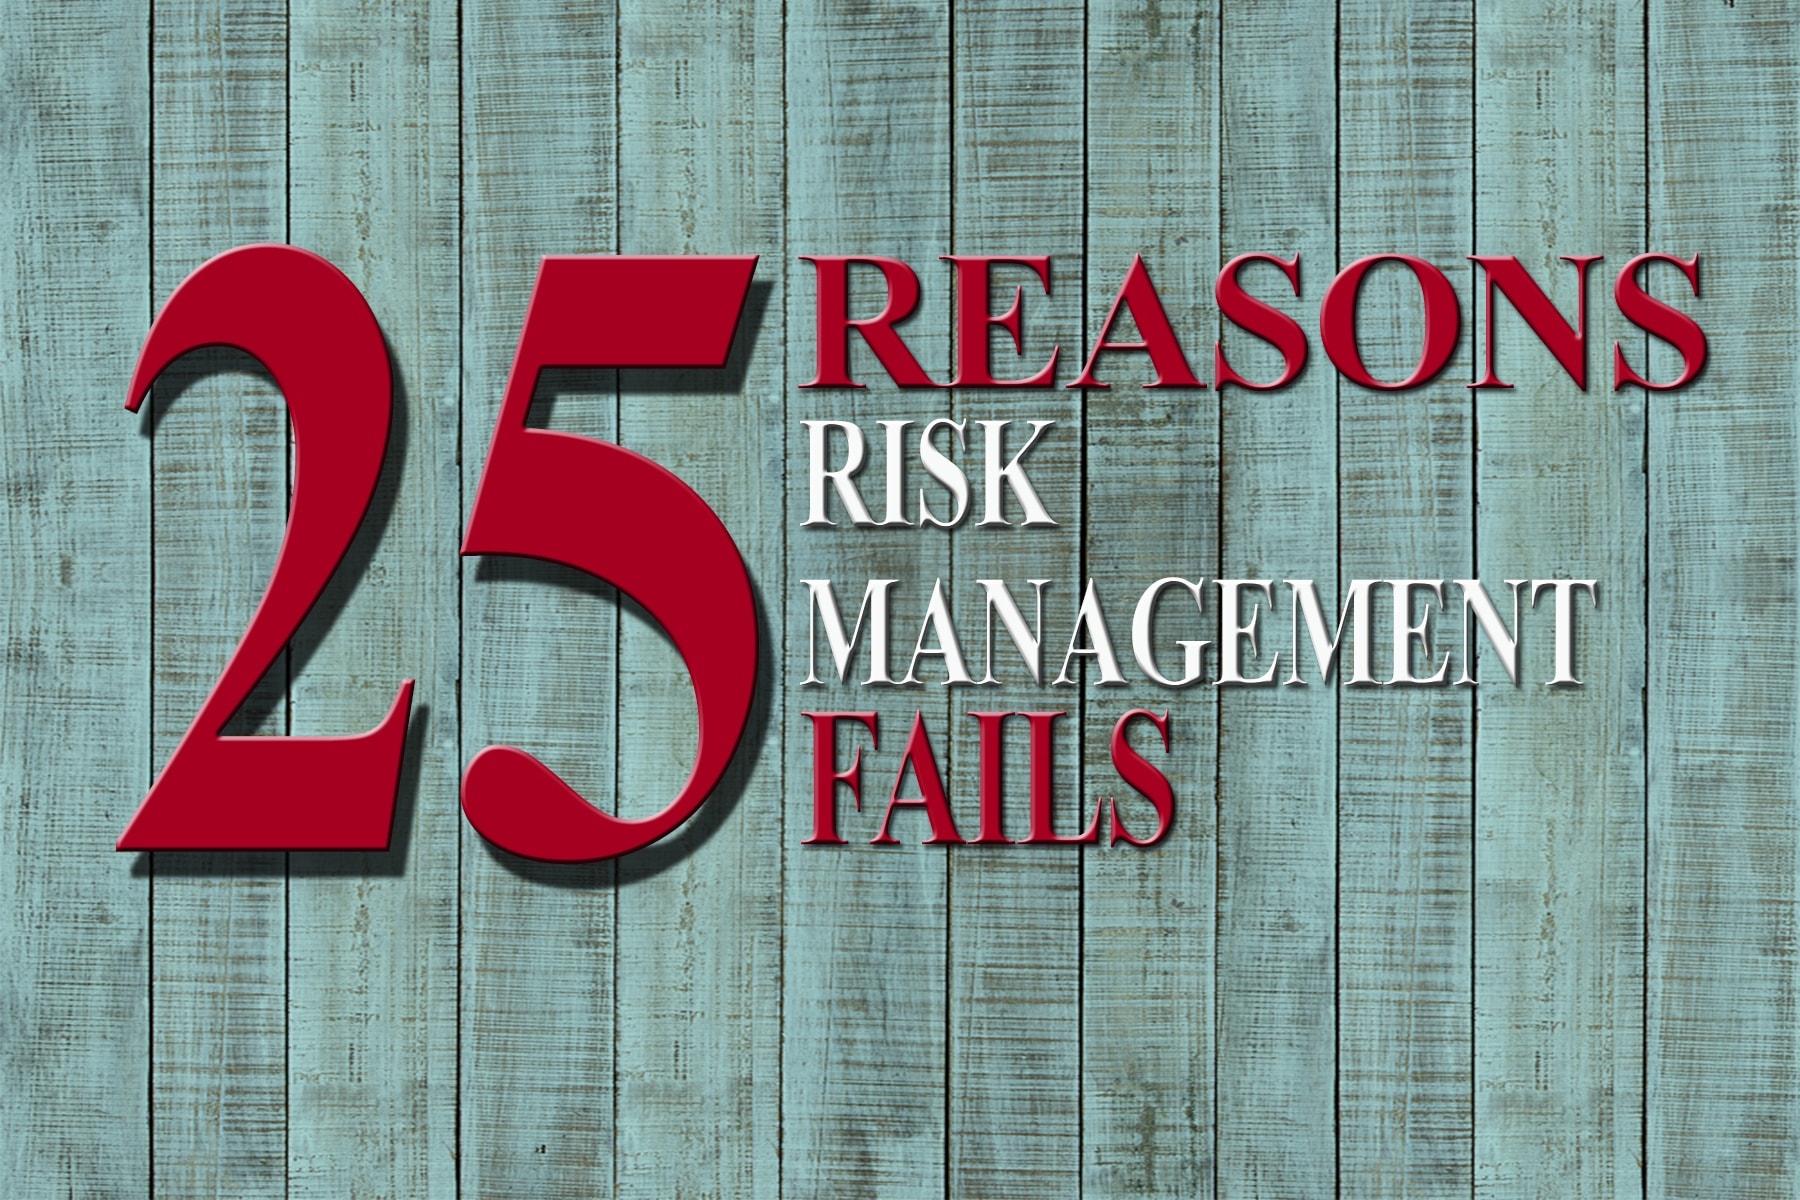 25 Reasons for Risk Management Failure